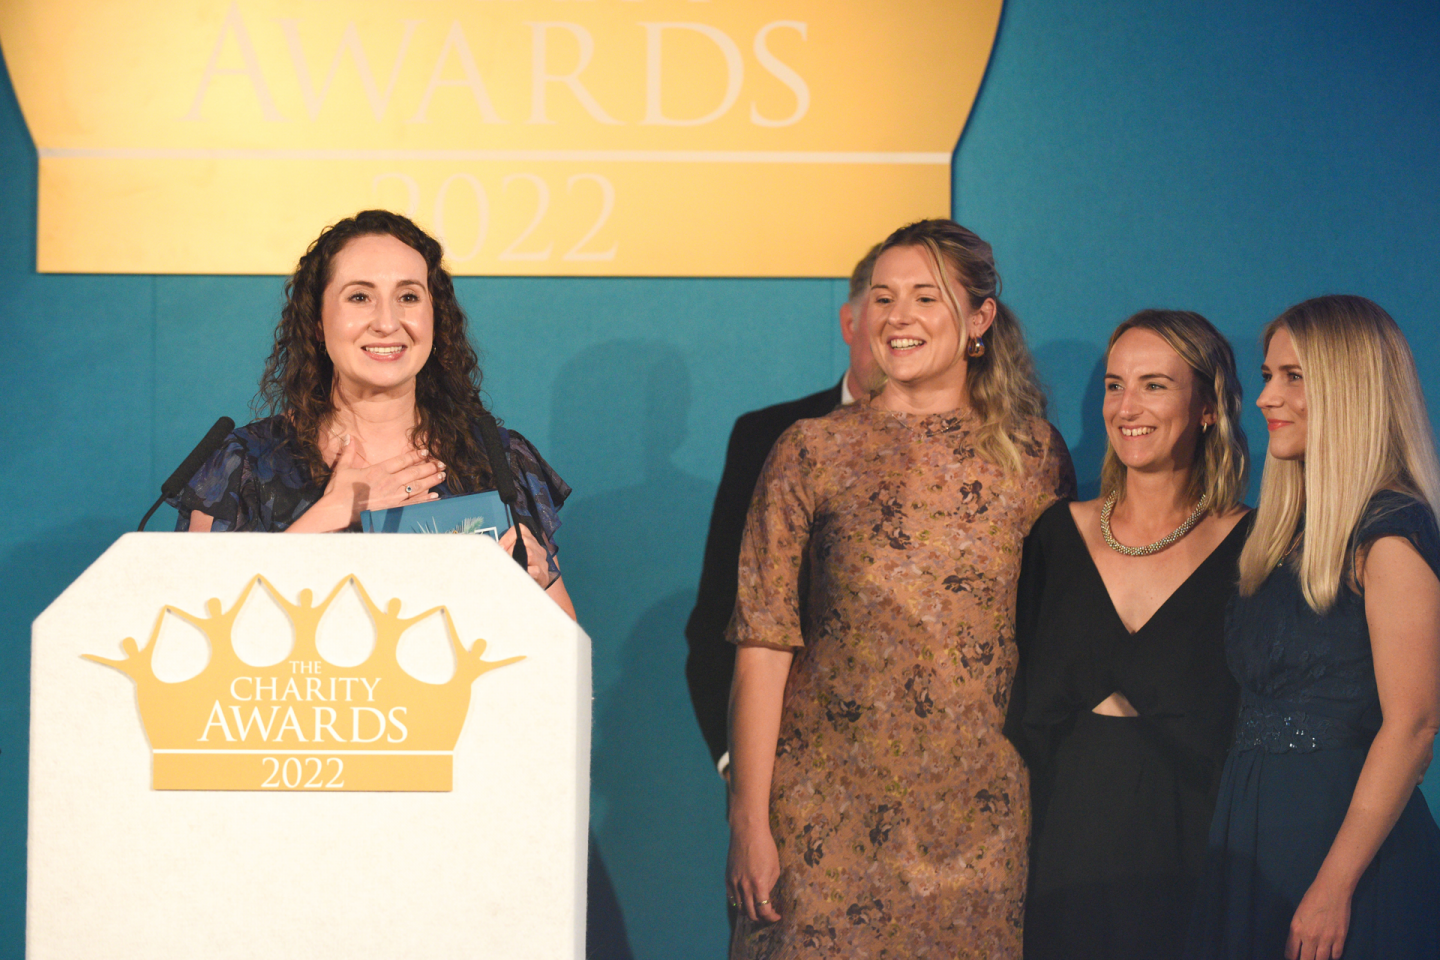 The 2022 Charity Awards Gallery